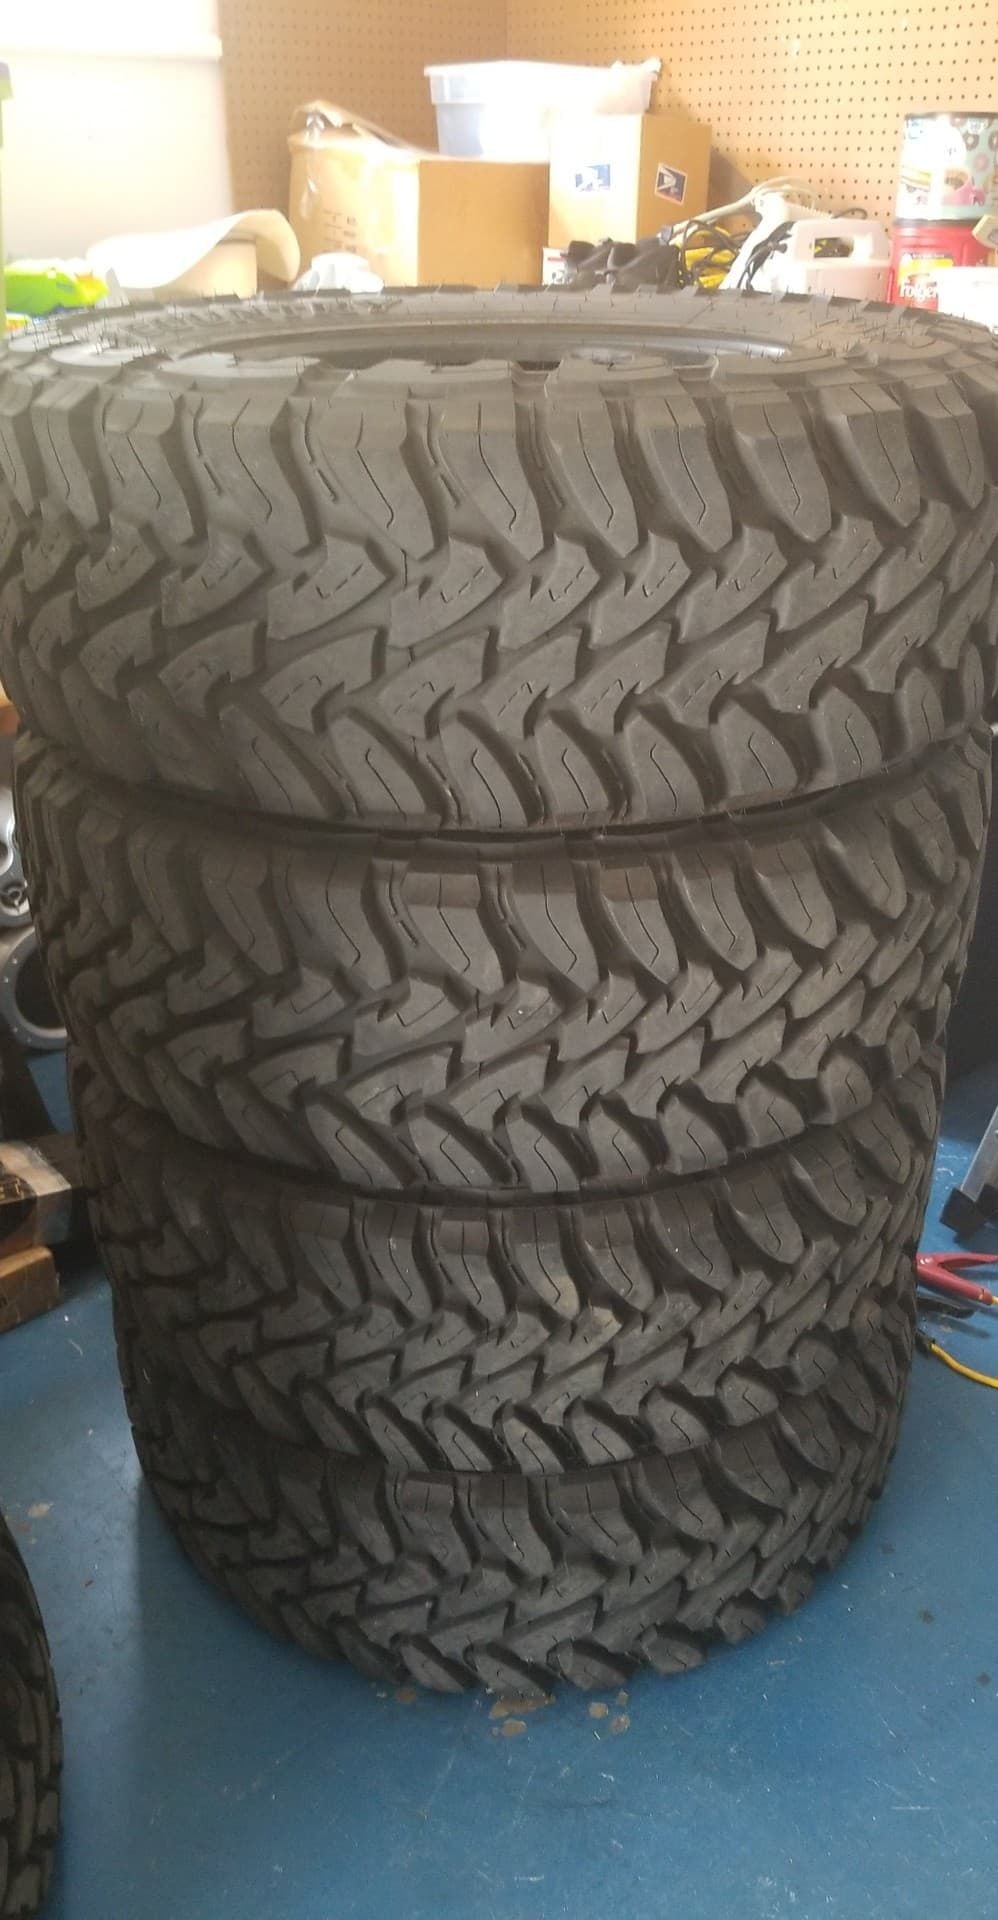 Wheels and Tires/Axles - 37x12.50x20 Toyo M/T - Used - Lake Wales, FL 33898, United States